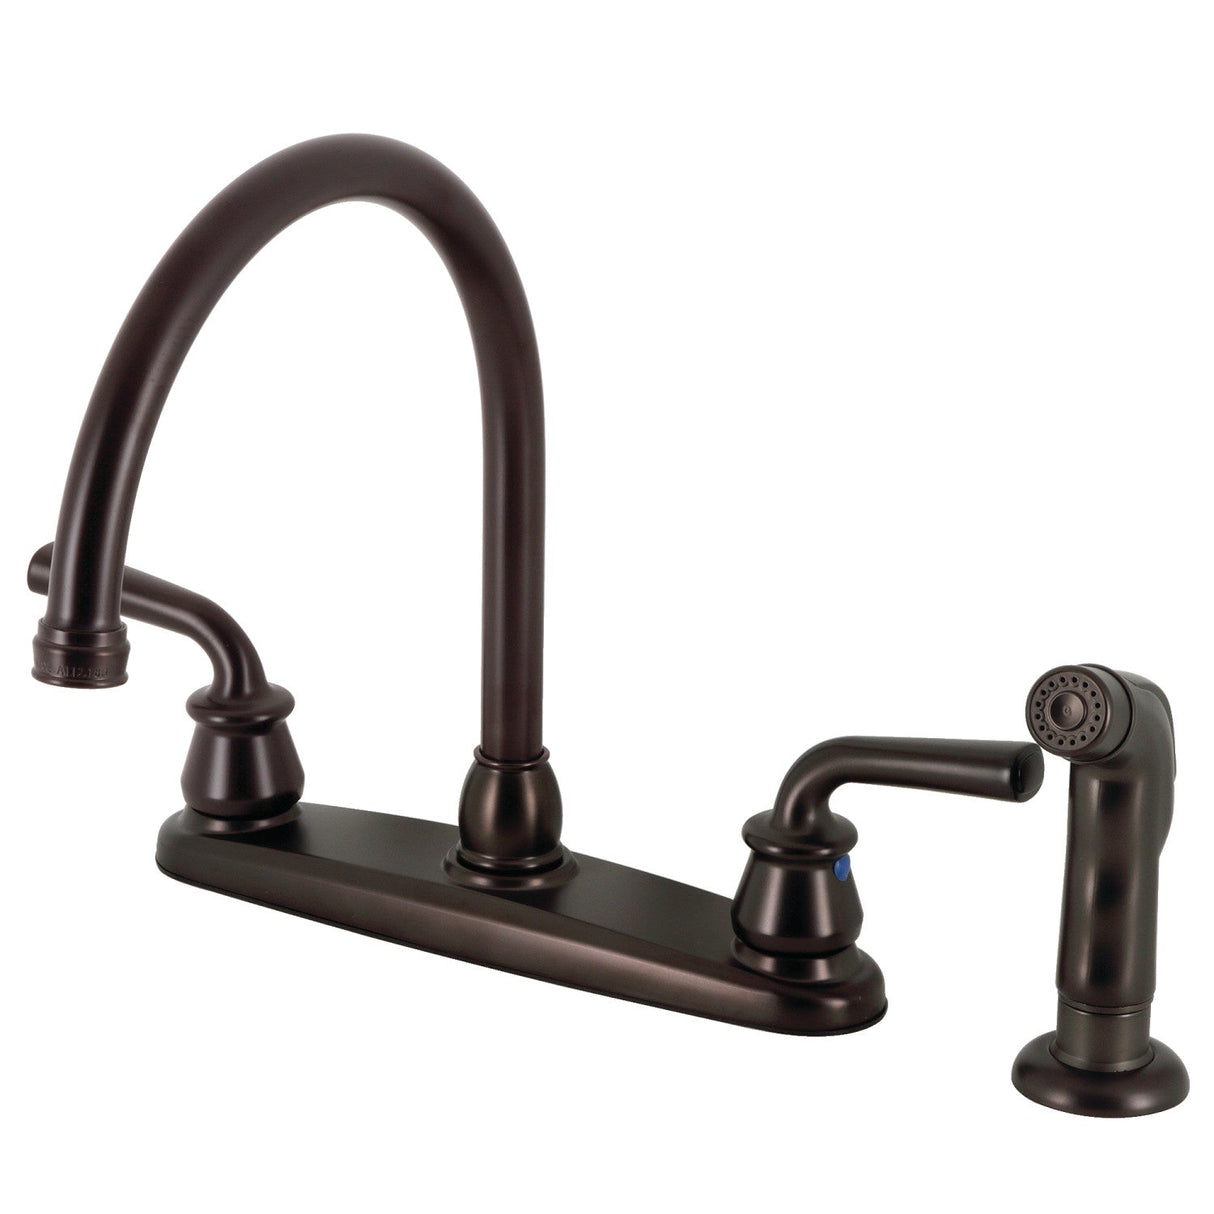 Restoration KB725RXLSP Two-Handle 4-Hole Deck Mount 8" Centerset Kitchen Faucet with Side Sprayer, Oil Rubbed Bronze